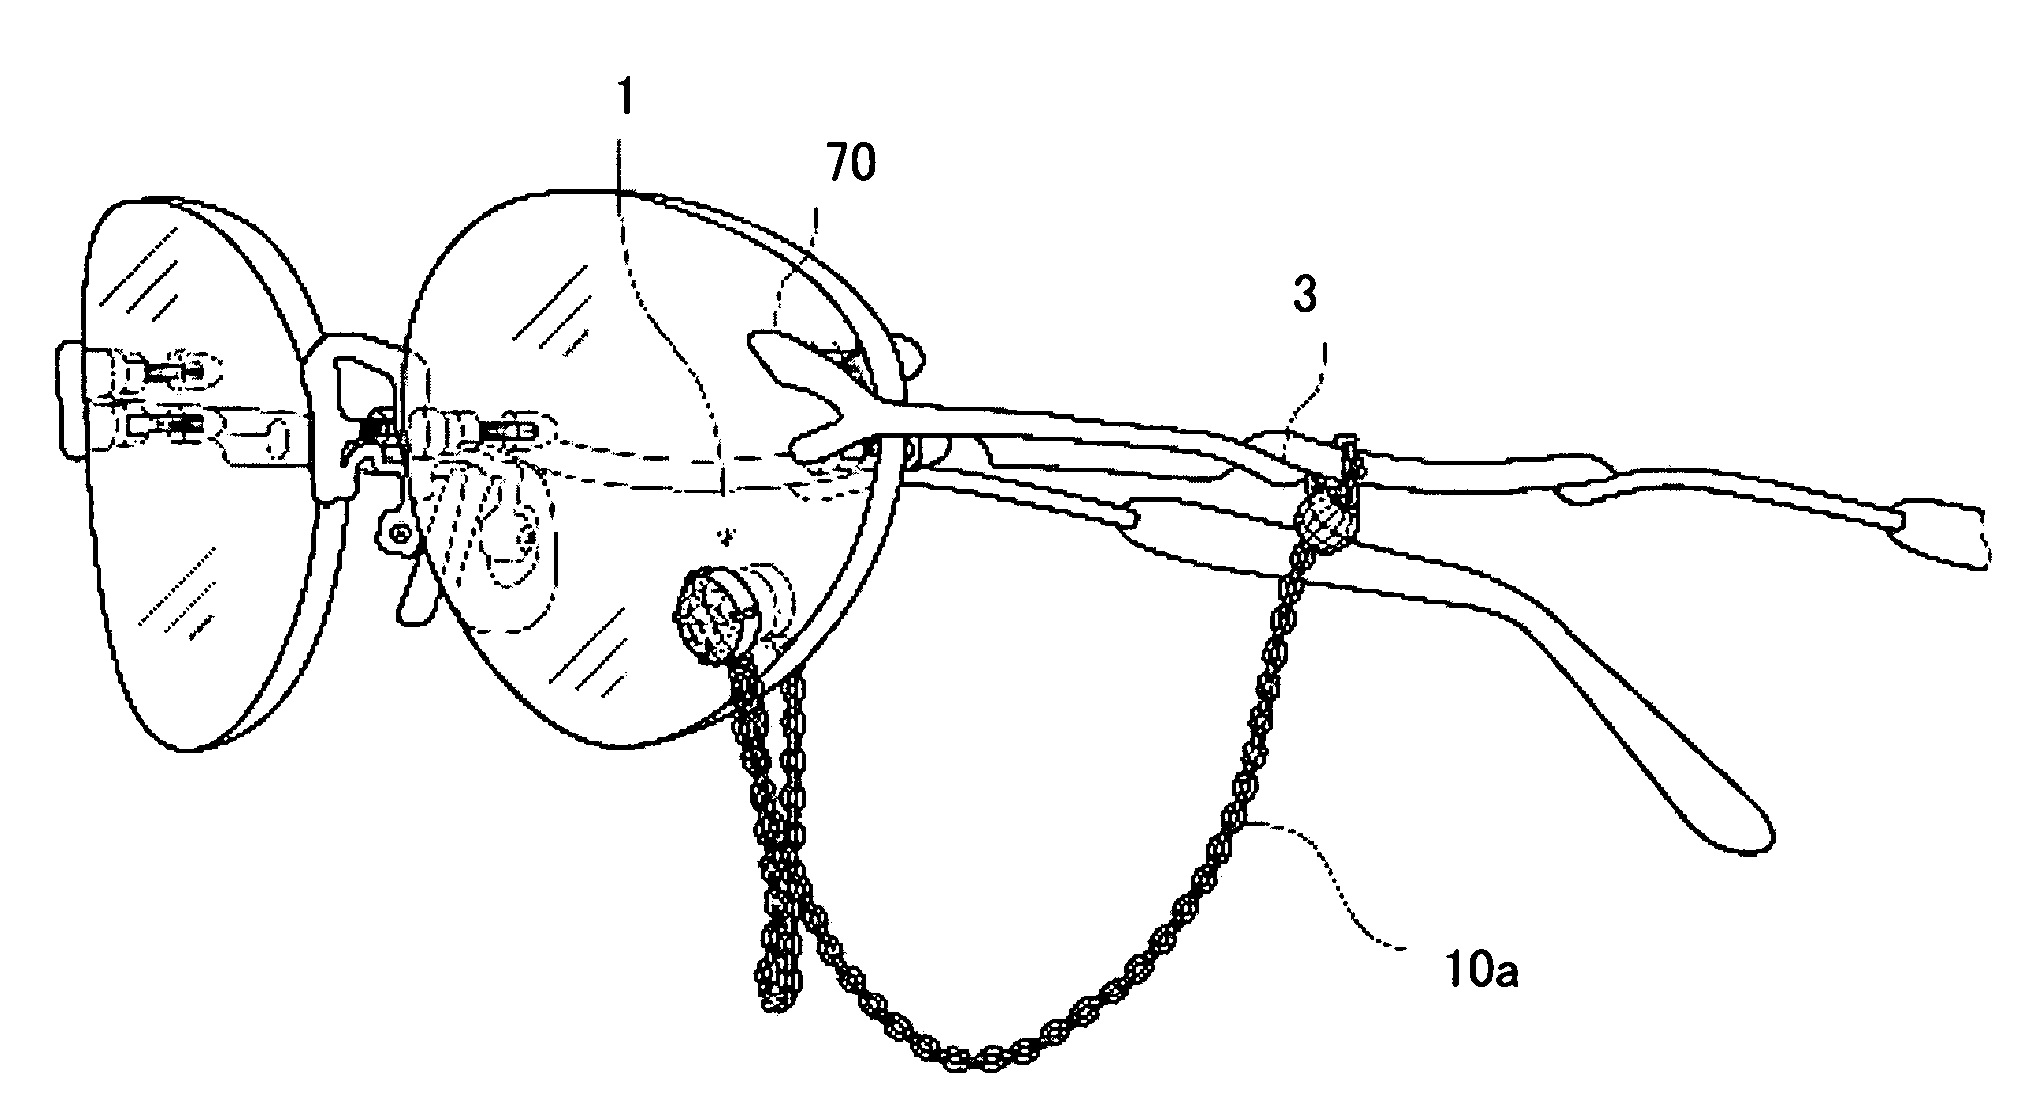 Jewelry article for a lens of eyeglasses and a jewelry-installation tool for a pair of eyeglasses